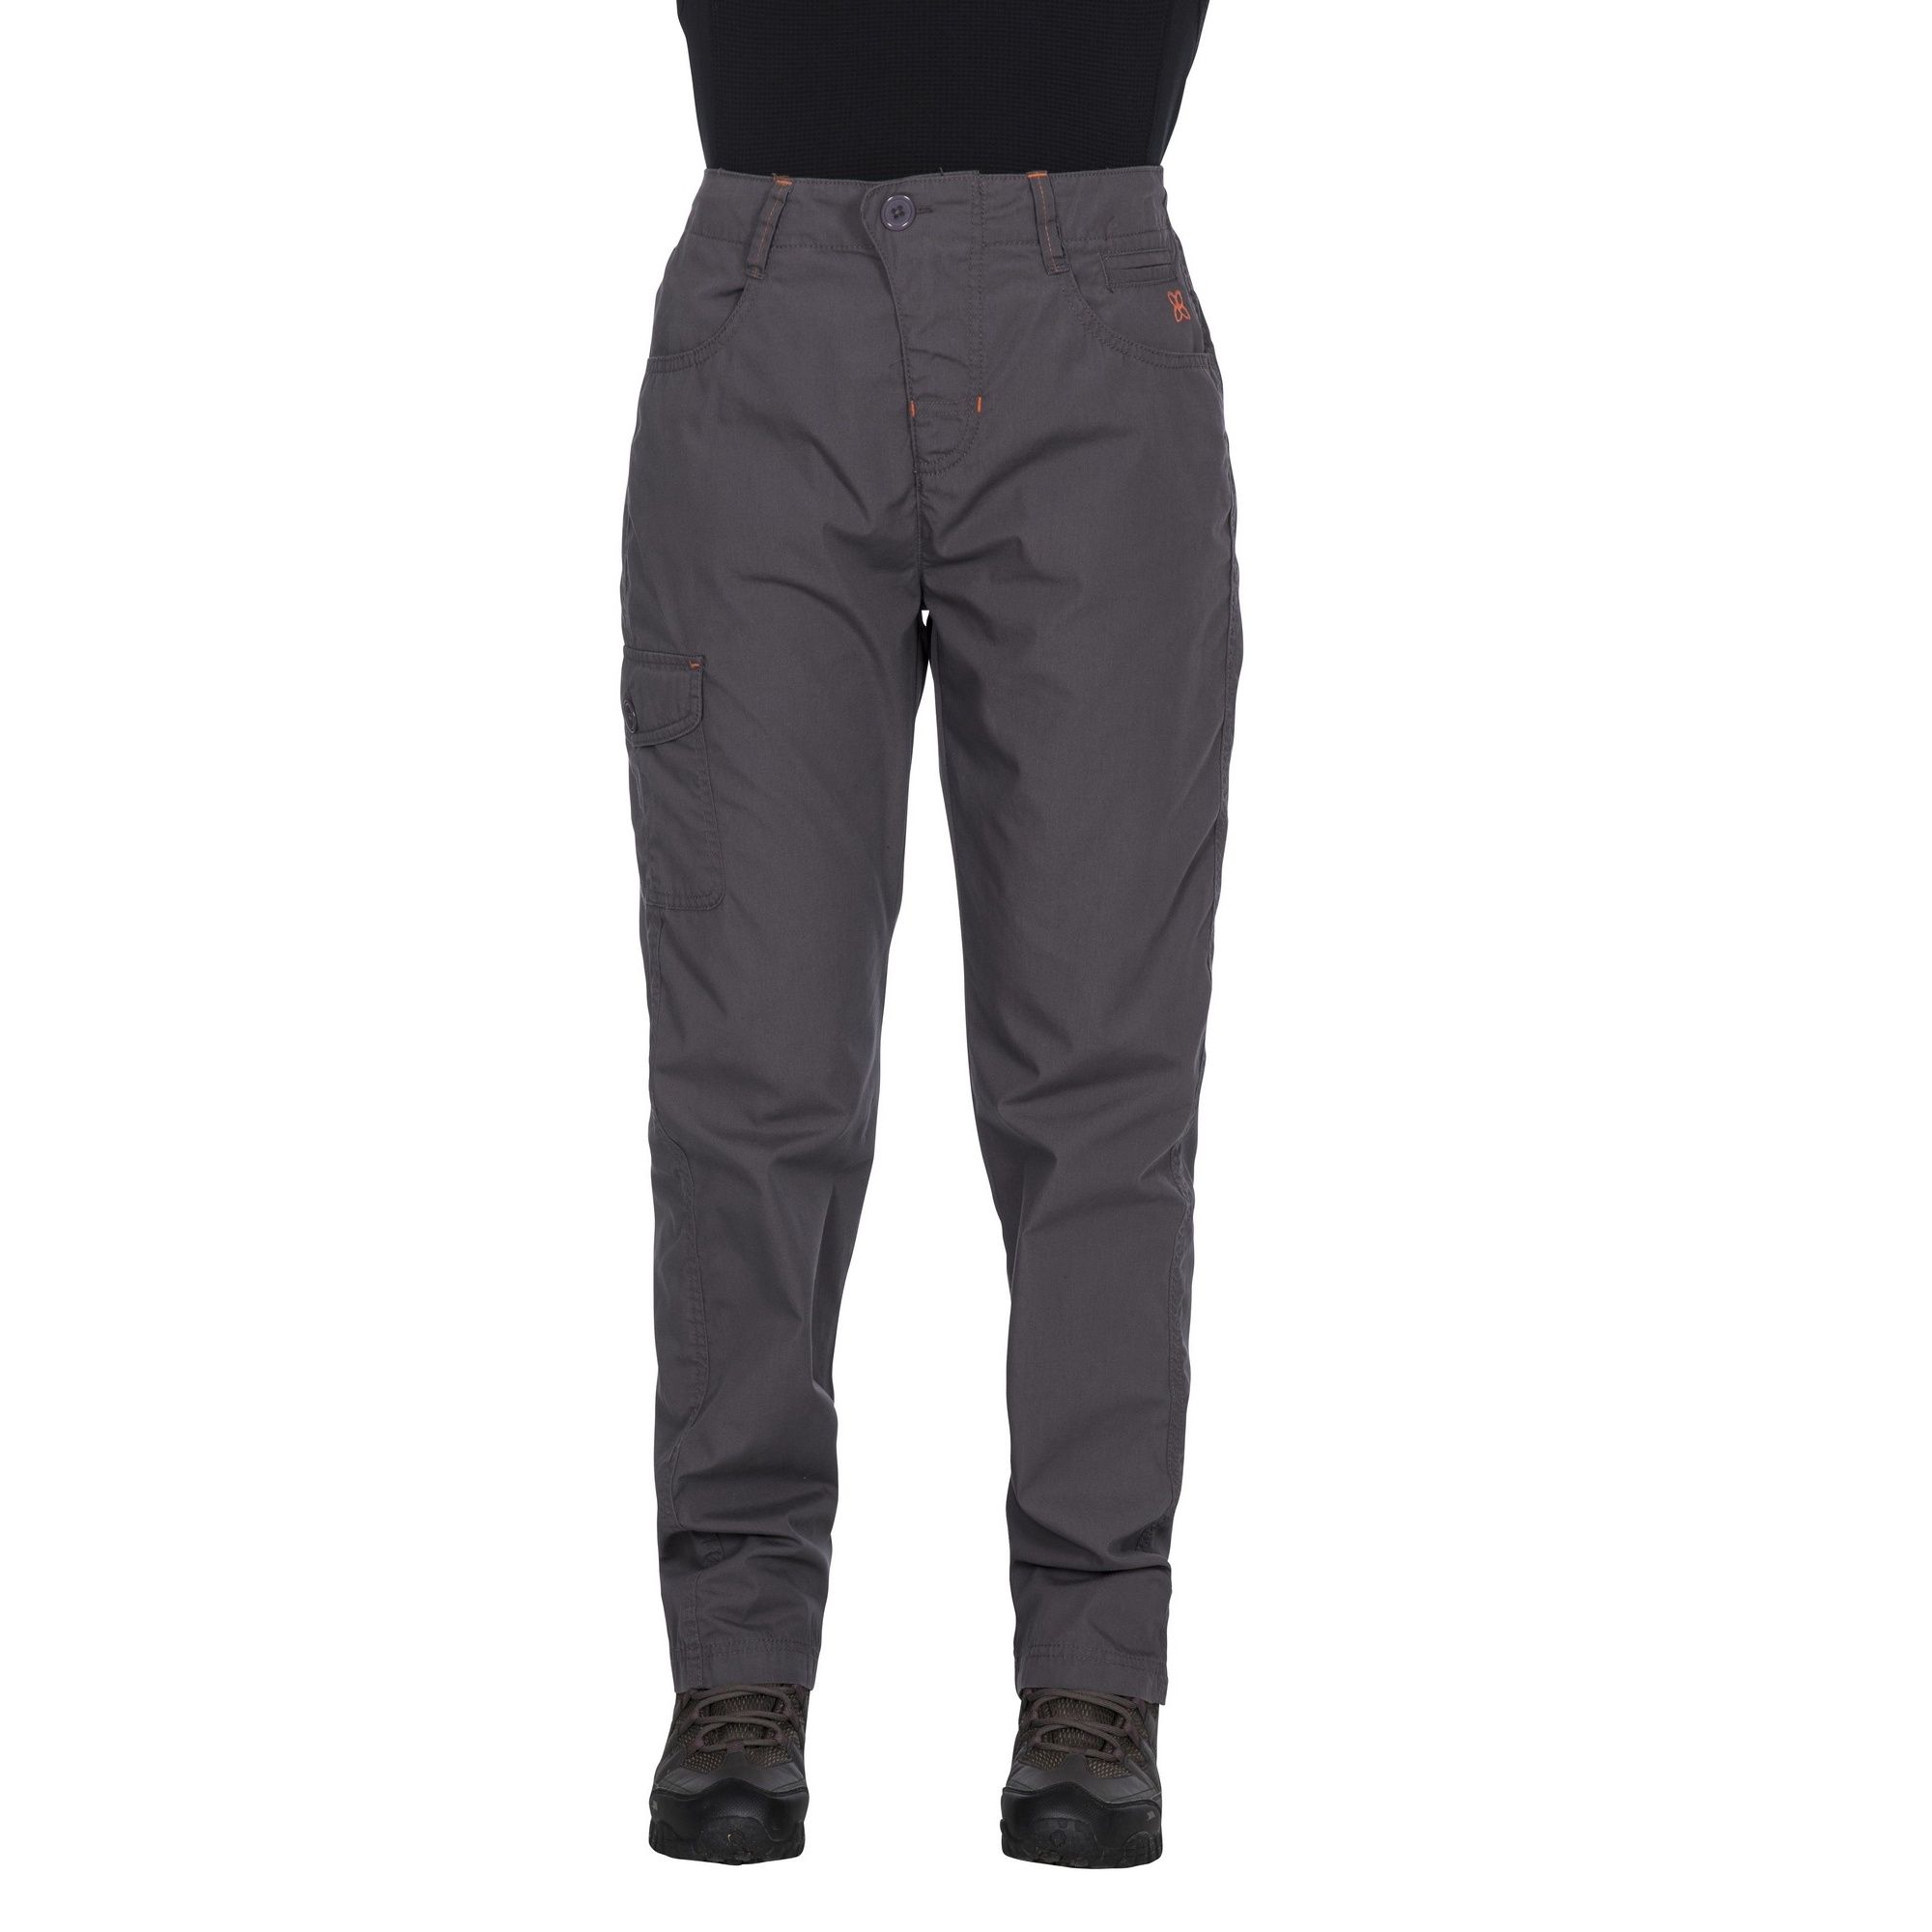 Womens trousers. Adjustable waist with back elastic. 1 zip pocket at back. 4 pockets. Contrast trims. UV40+. Water repellent. 65% Polyester, 35% Cotton, peached. Trespass Womens Waist Sizing (approx): XS/8 - 25in/66cm, S/10 - 28in/71cm, M/12 - 30in/76cm, L/14 - 32in/81cm, XL/16 - 34in/86cm, XXL/18 - 36in/91.5cm.